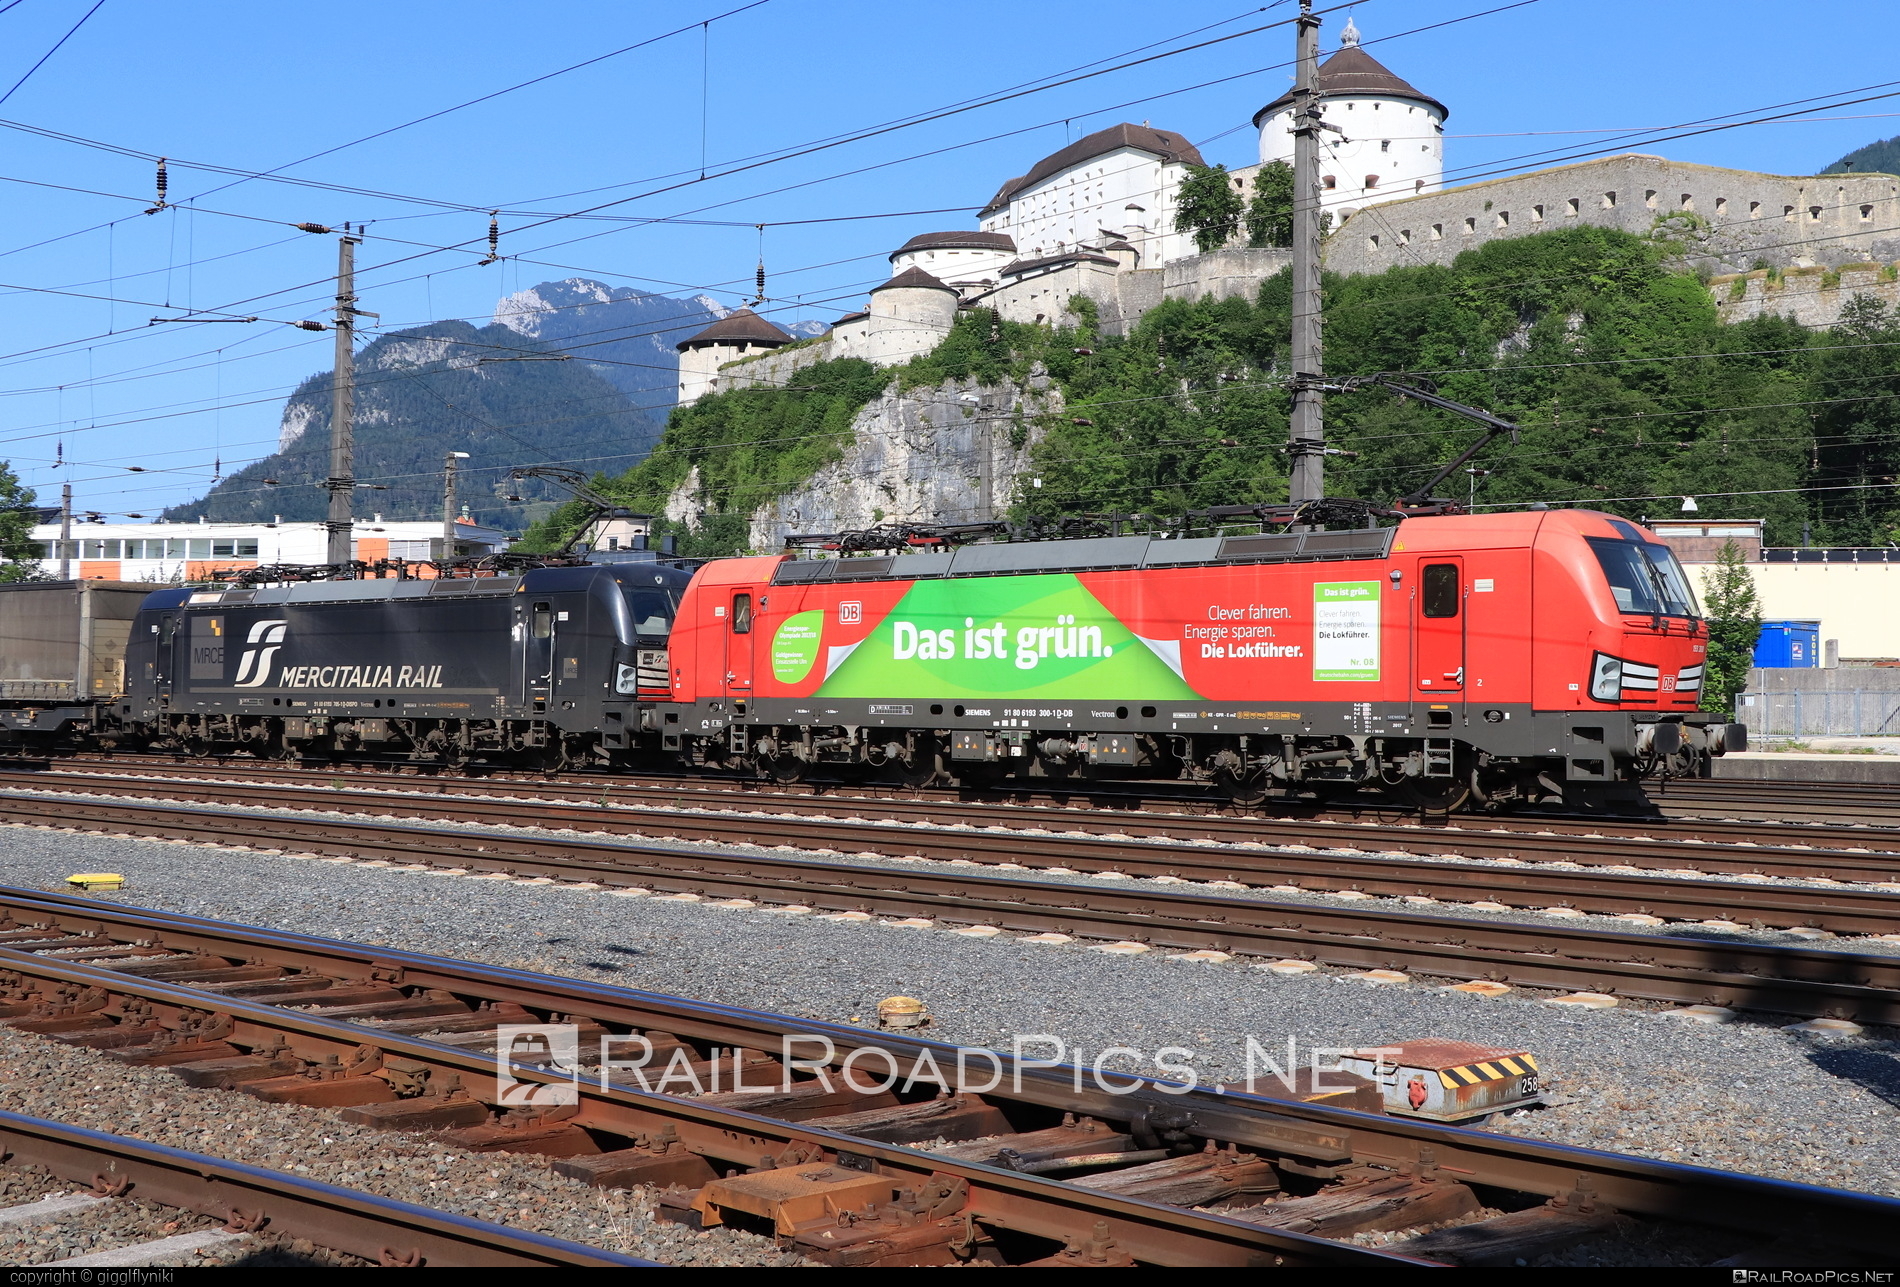 Siemens Vectron MS - 193 300 operated by DB Cargo AG #db #dbcargo #dbcargoag #deutschebahn #siemens #siemensVectron #siemensVectronMS #vectron #vectronMS